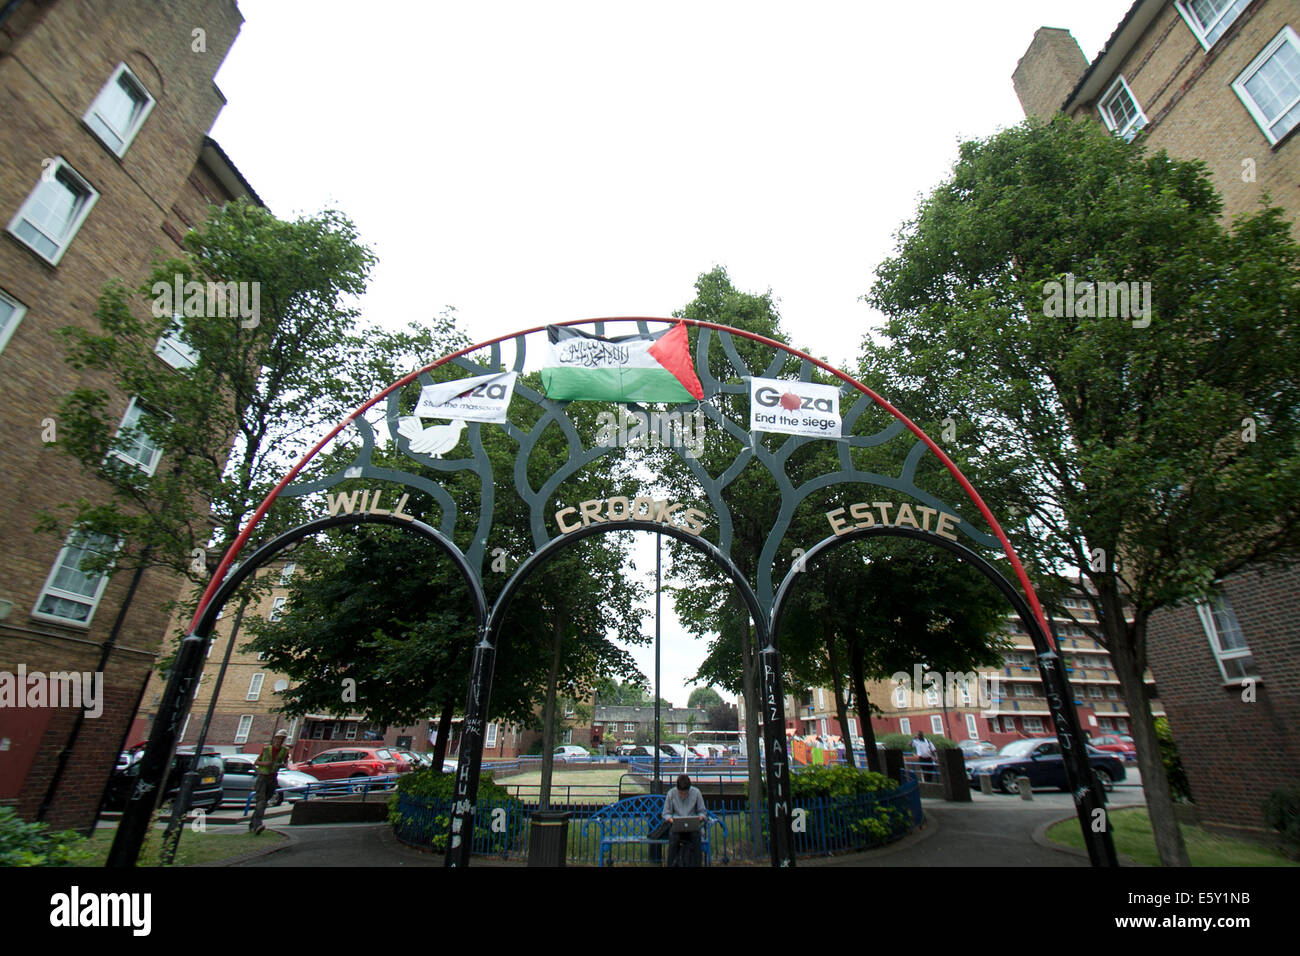 Poplar, London, UK. 8th August, 2014. The flag of (ISIS) Islamic state of Iraq and Levant is removed from the Will Crooks estate in East London a day after flying at the entrance Credit:  amer ghazzal/Alamy Live News Stock Photo